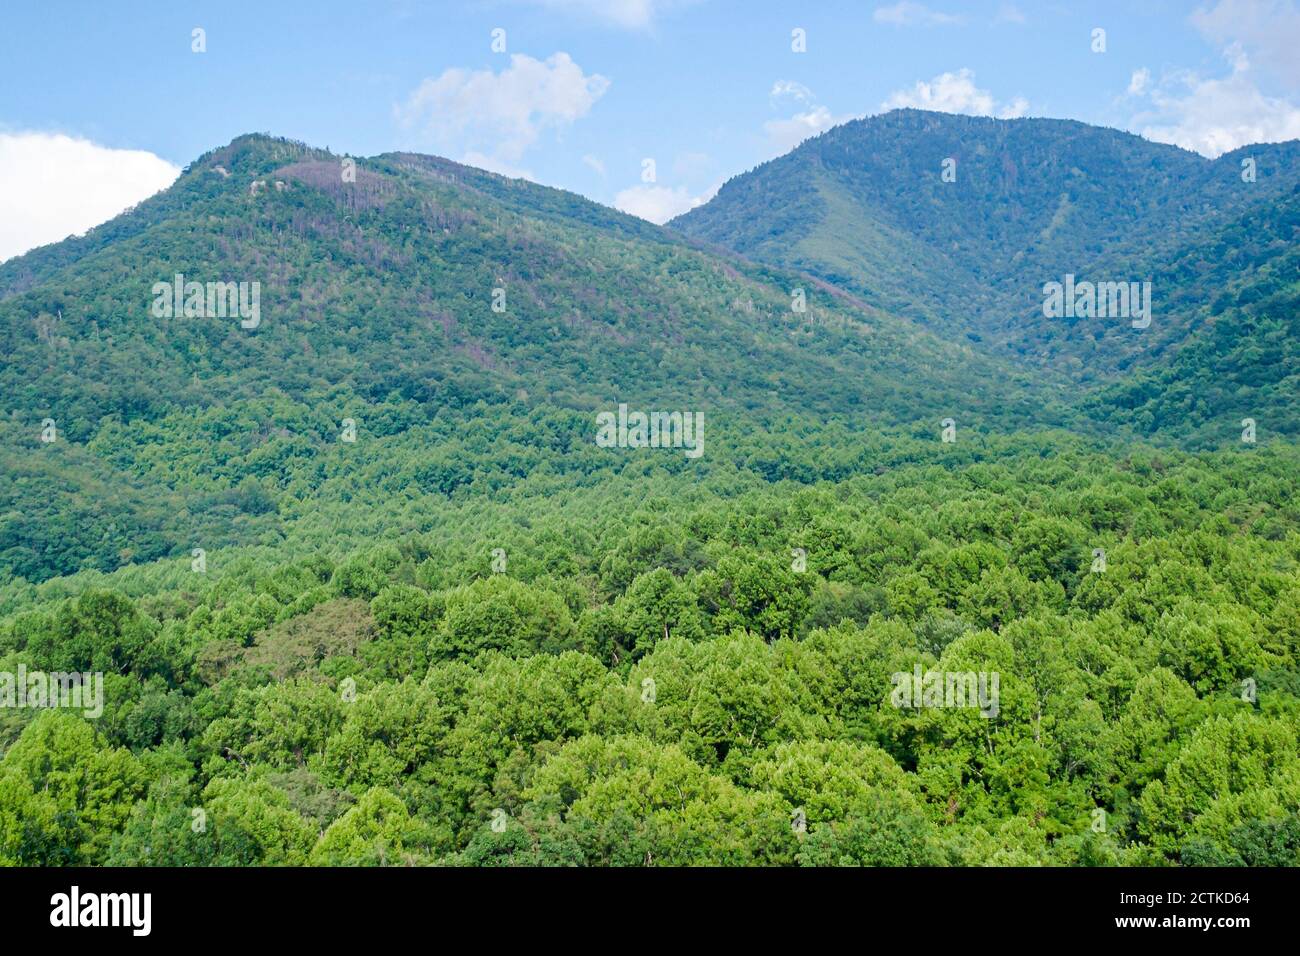 Tennessee Great Smoky Mountains National Park,nature natural scenery mountain peak trees, Stock Photo